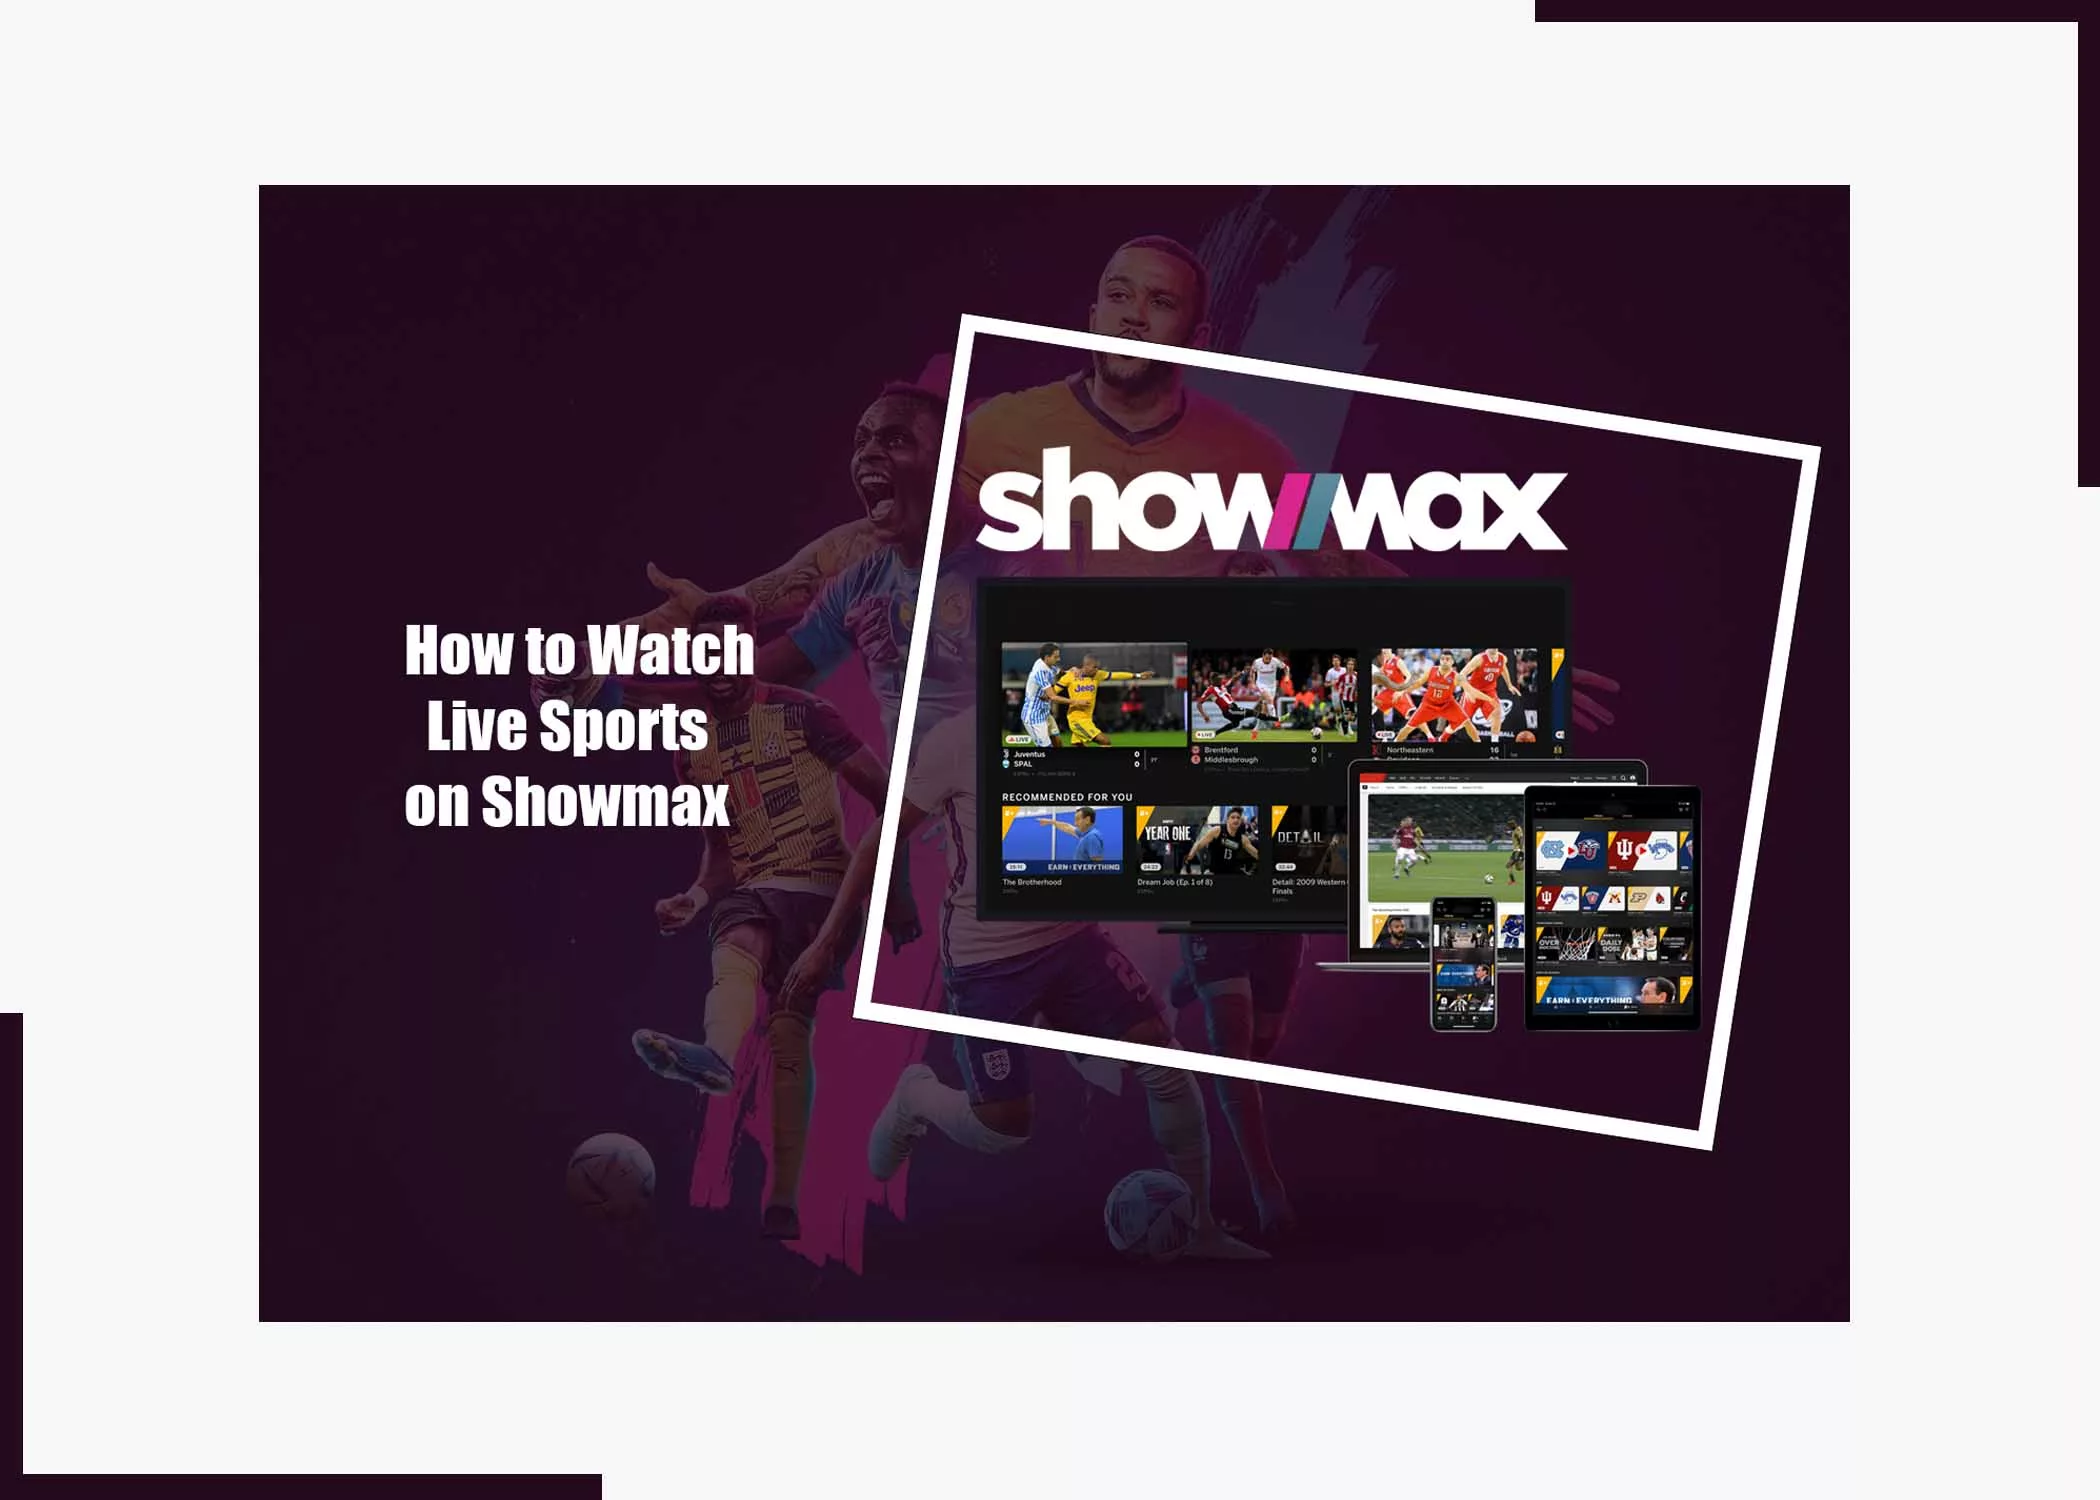 How to Watch Live Sports on Showmax